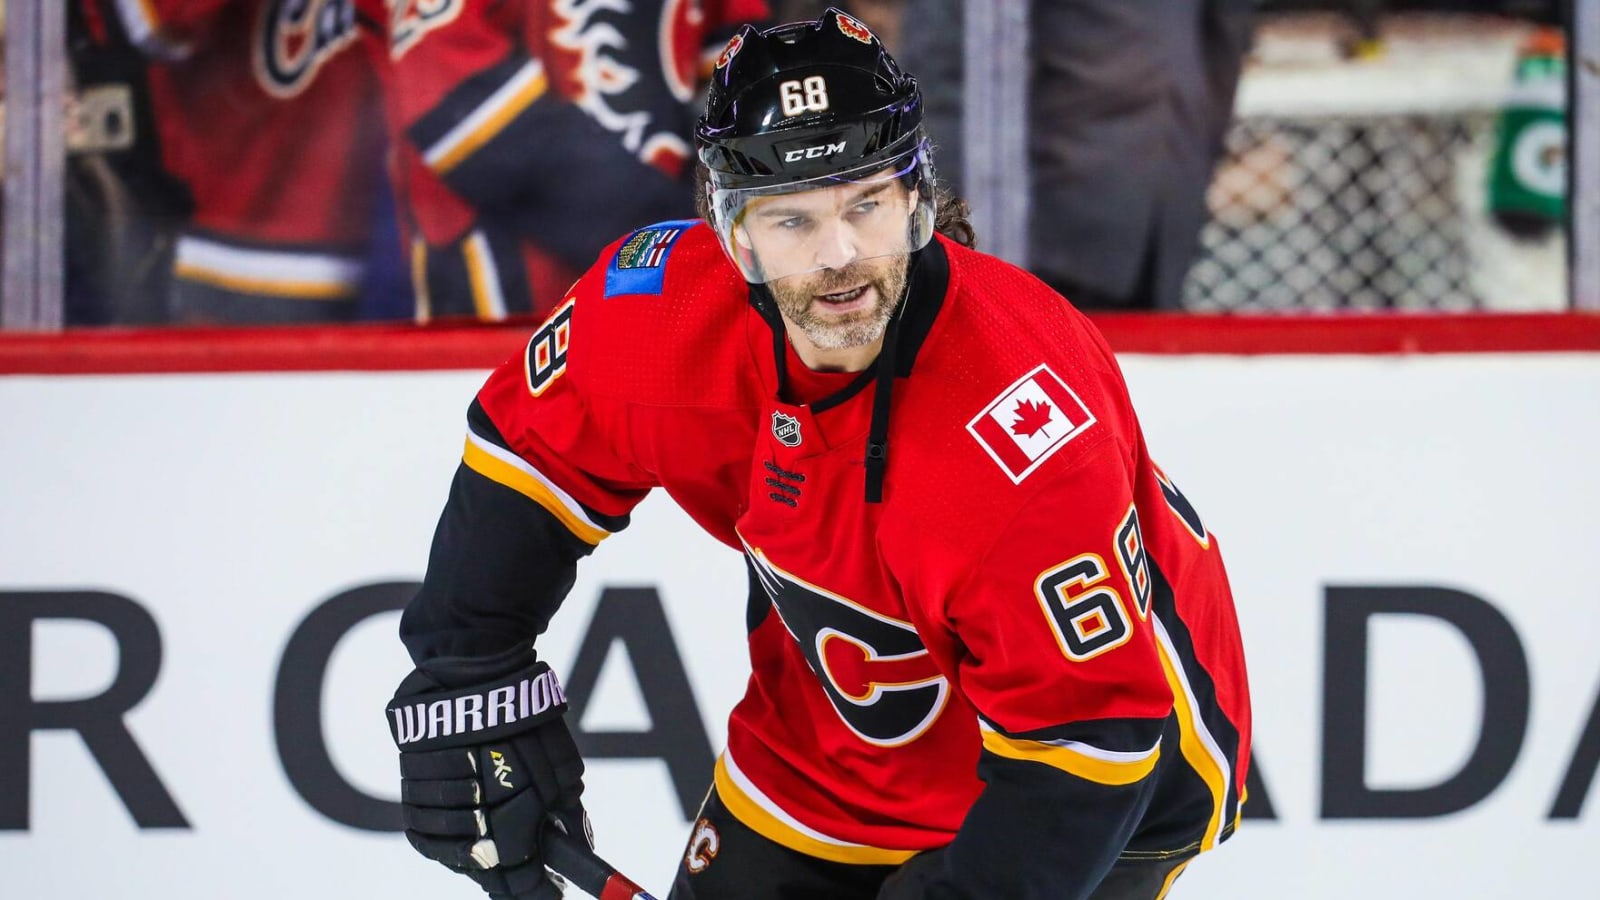 Jagr Gets Real; Retirement, Regrets, & ‘If You’re Satisfied, You’re Done’